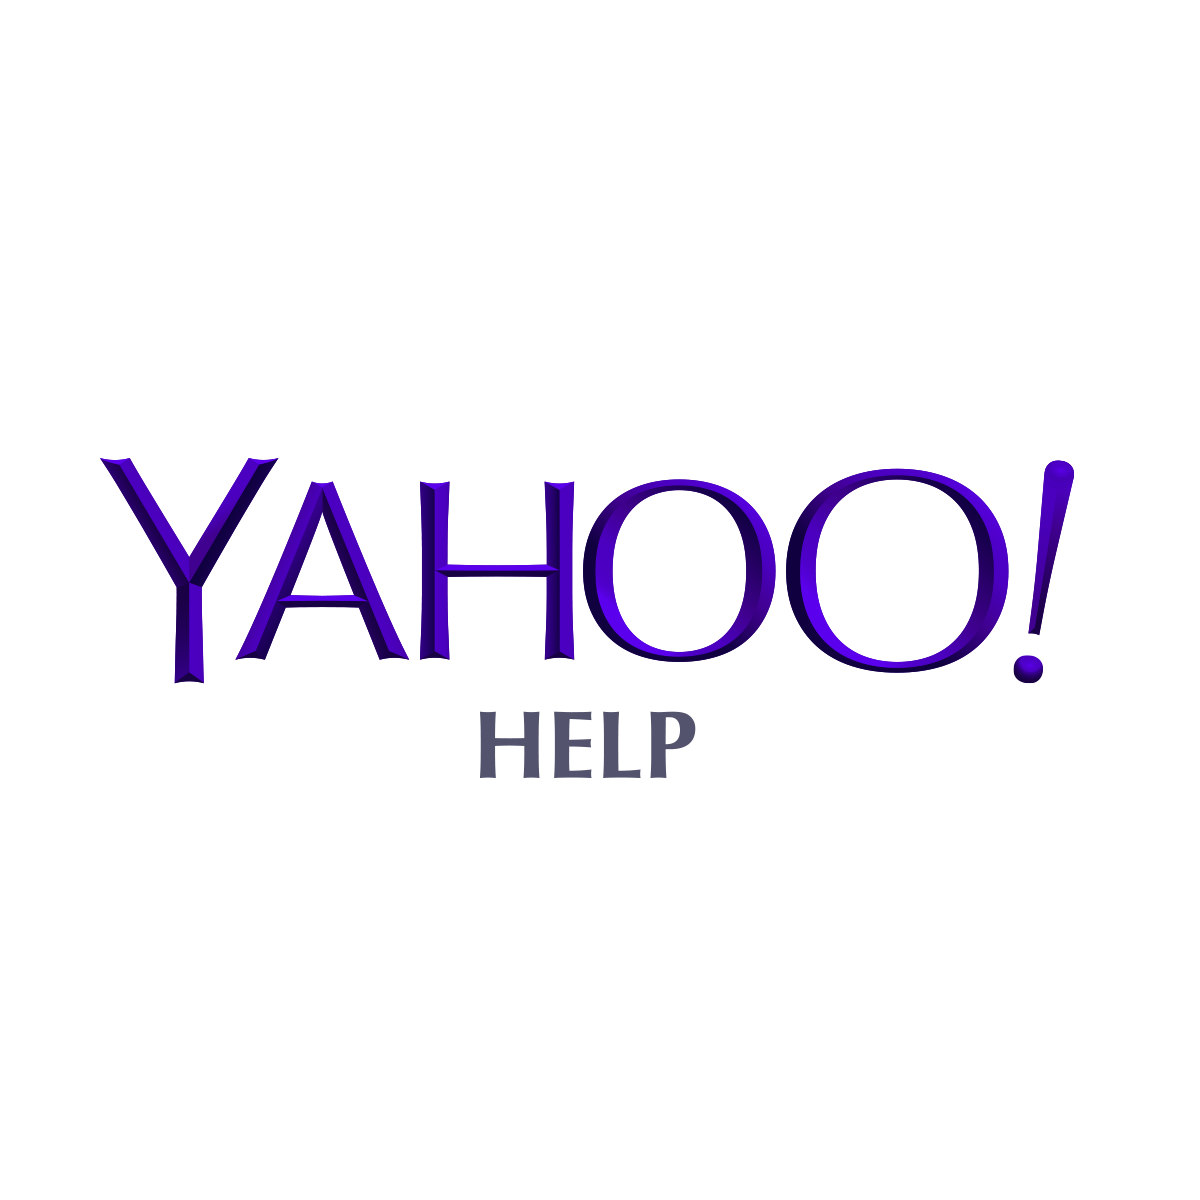 Number to Call Yahoo Support